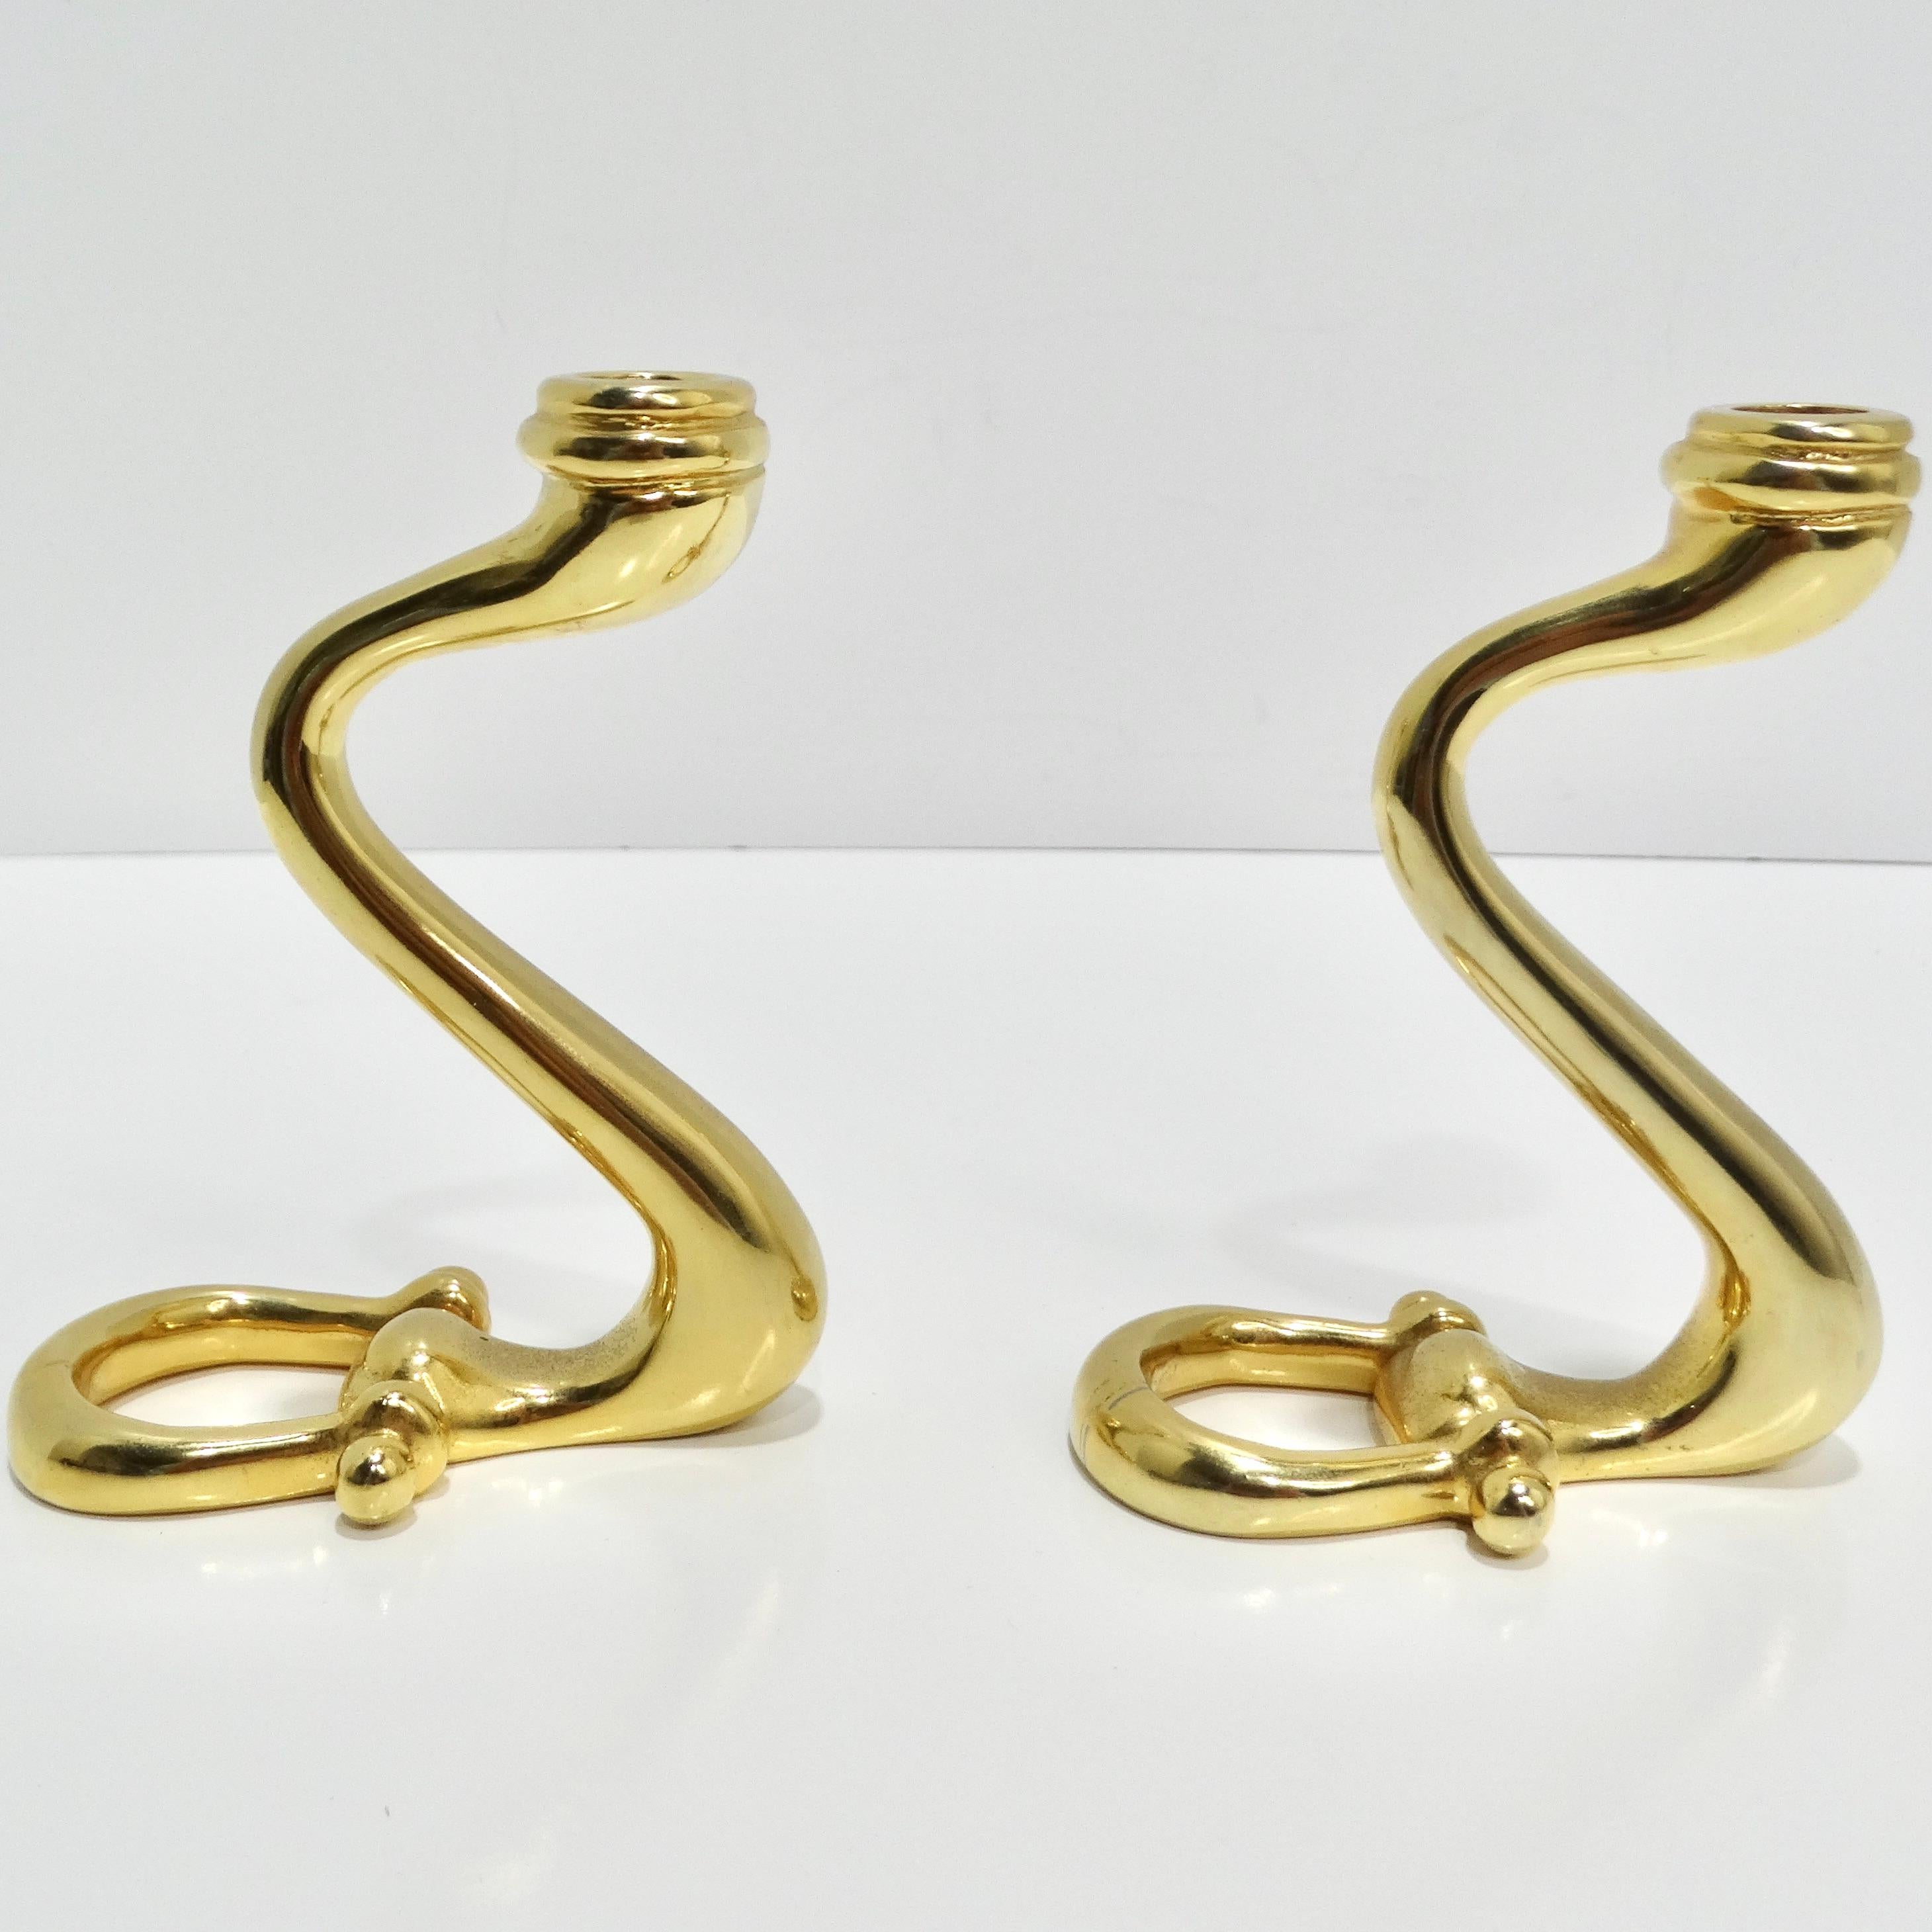 Gucci 1980s Brass Horse Bit Candle Holders In Good Condition For Sale In Scottsdale, AZ